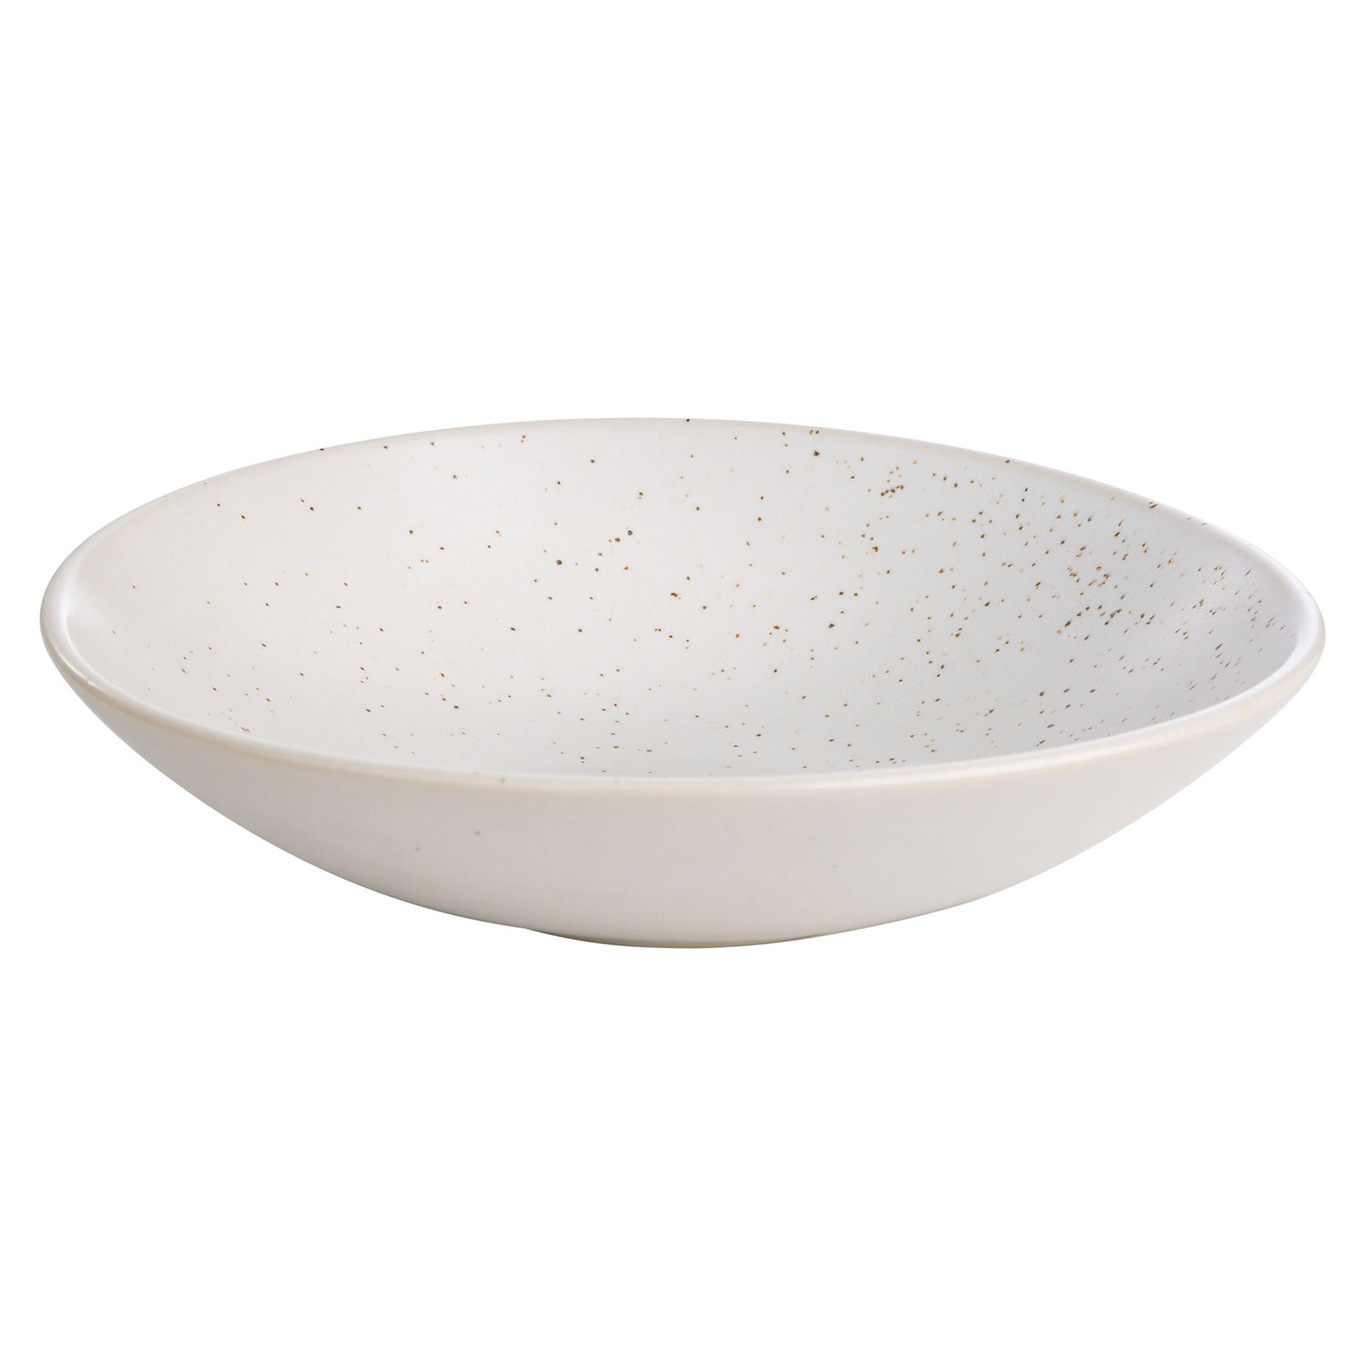 Deep Plate Stoneware, 22 cm White-spotted